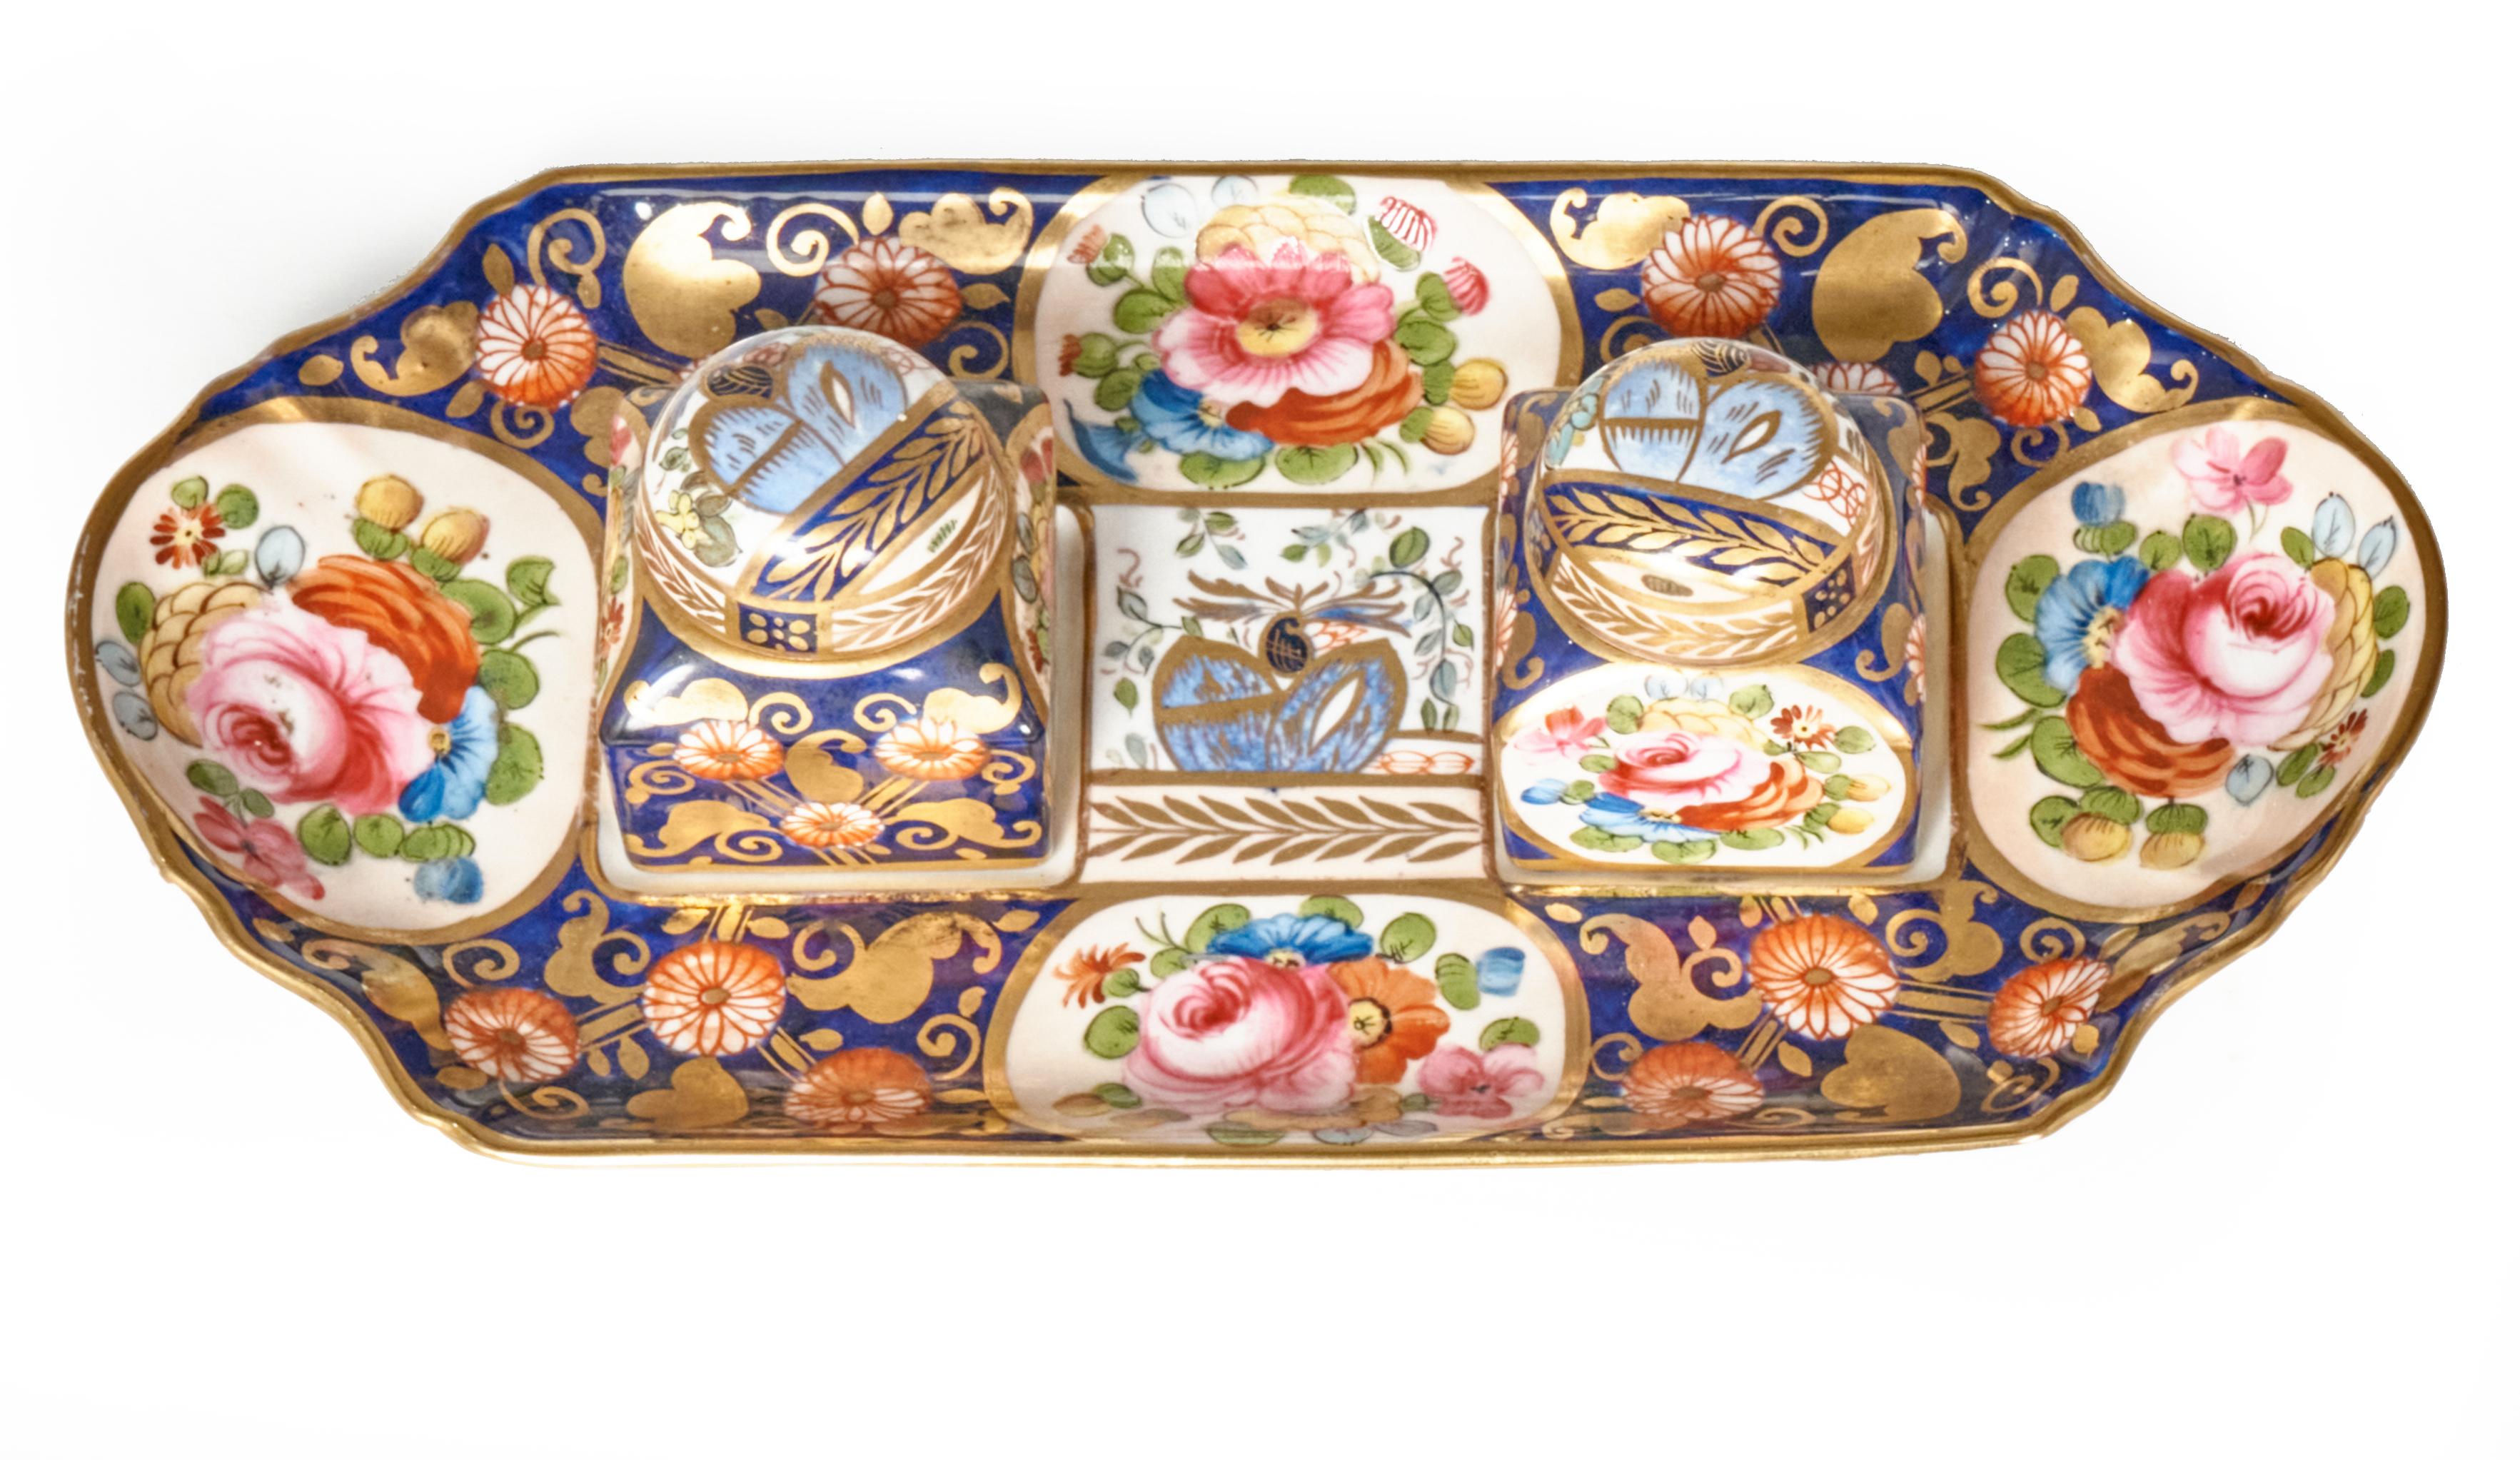 Beautiful and complete desk set by Crown Staffordshire, England dating to the first part of the 20th Century. It includes the hand painted tray with 2 covered ink wells with their liners. The set is skillfully decorated with cobalt blue, gold and